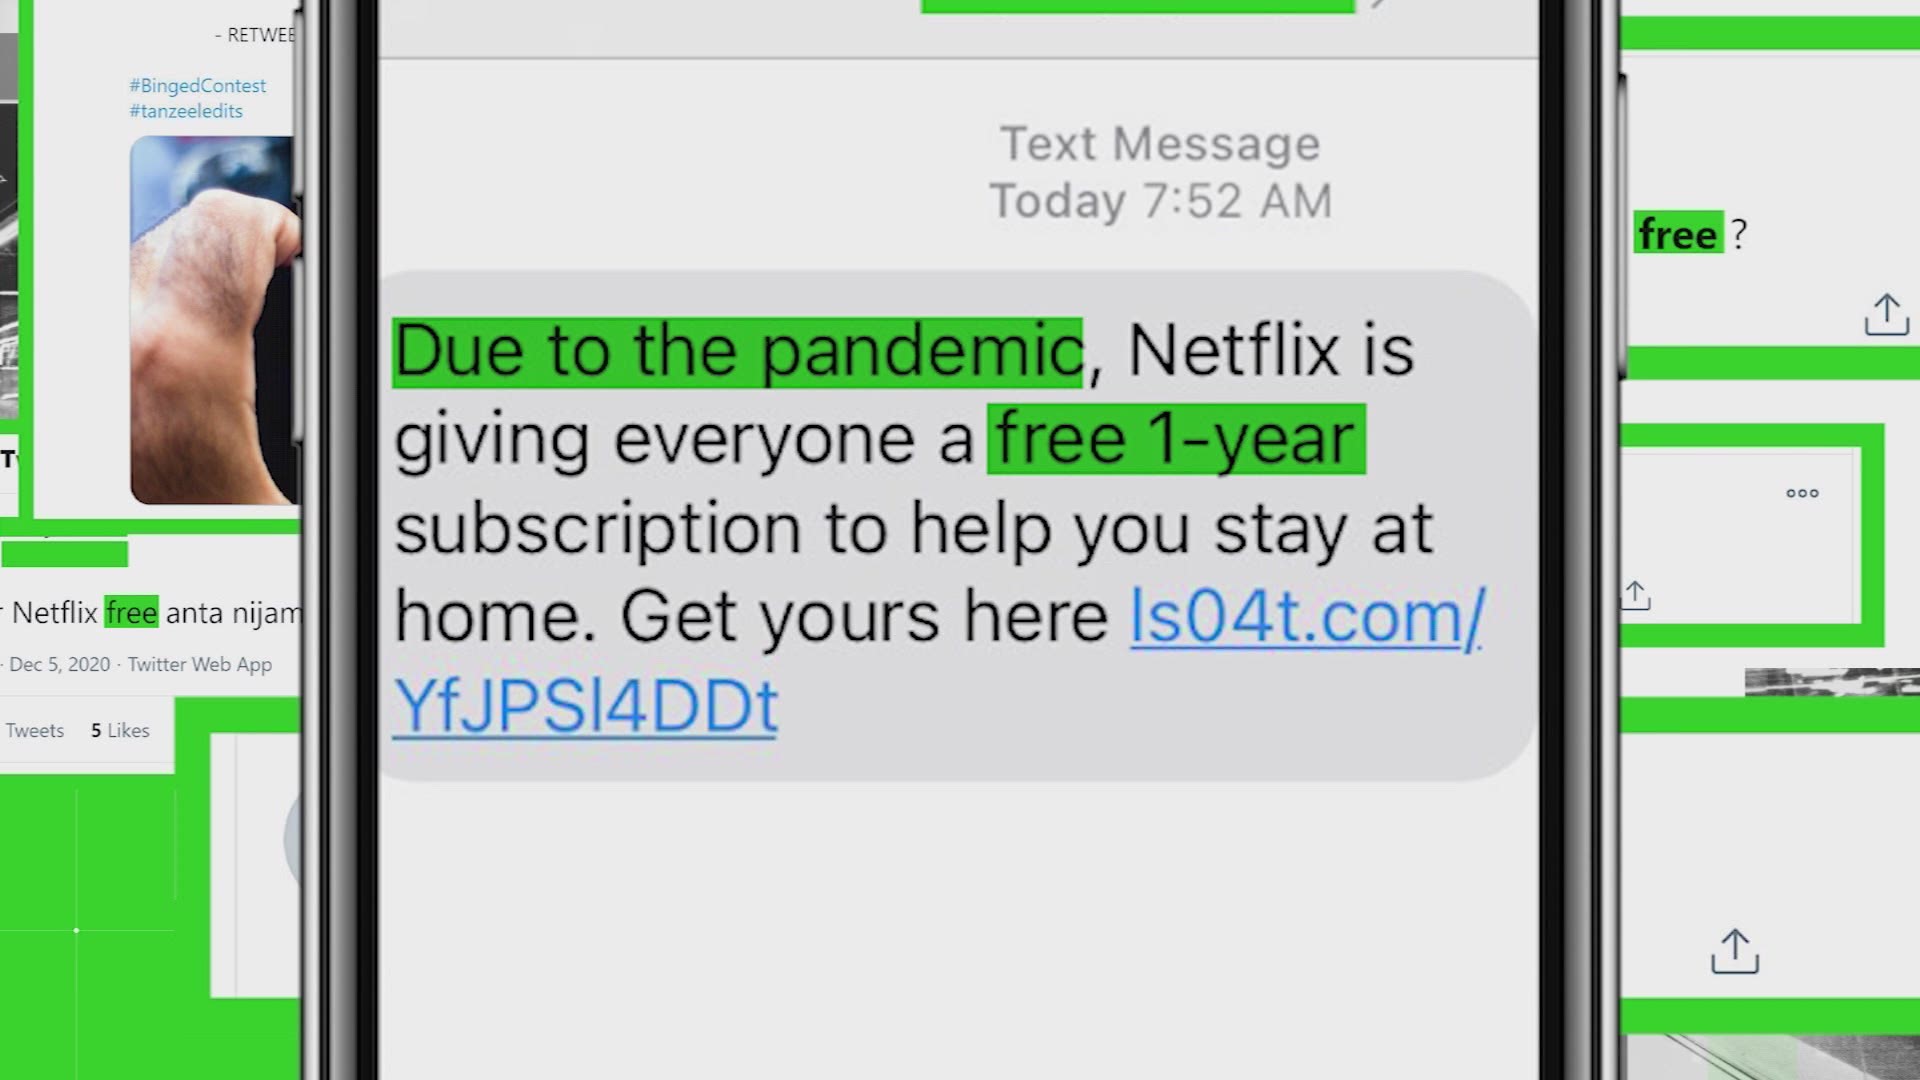 A year’s worth of free Netflix sounds like a good deal -- if it’s real. A few people contacted the VERIFY team after getting a text message with that offer.